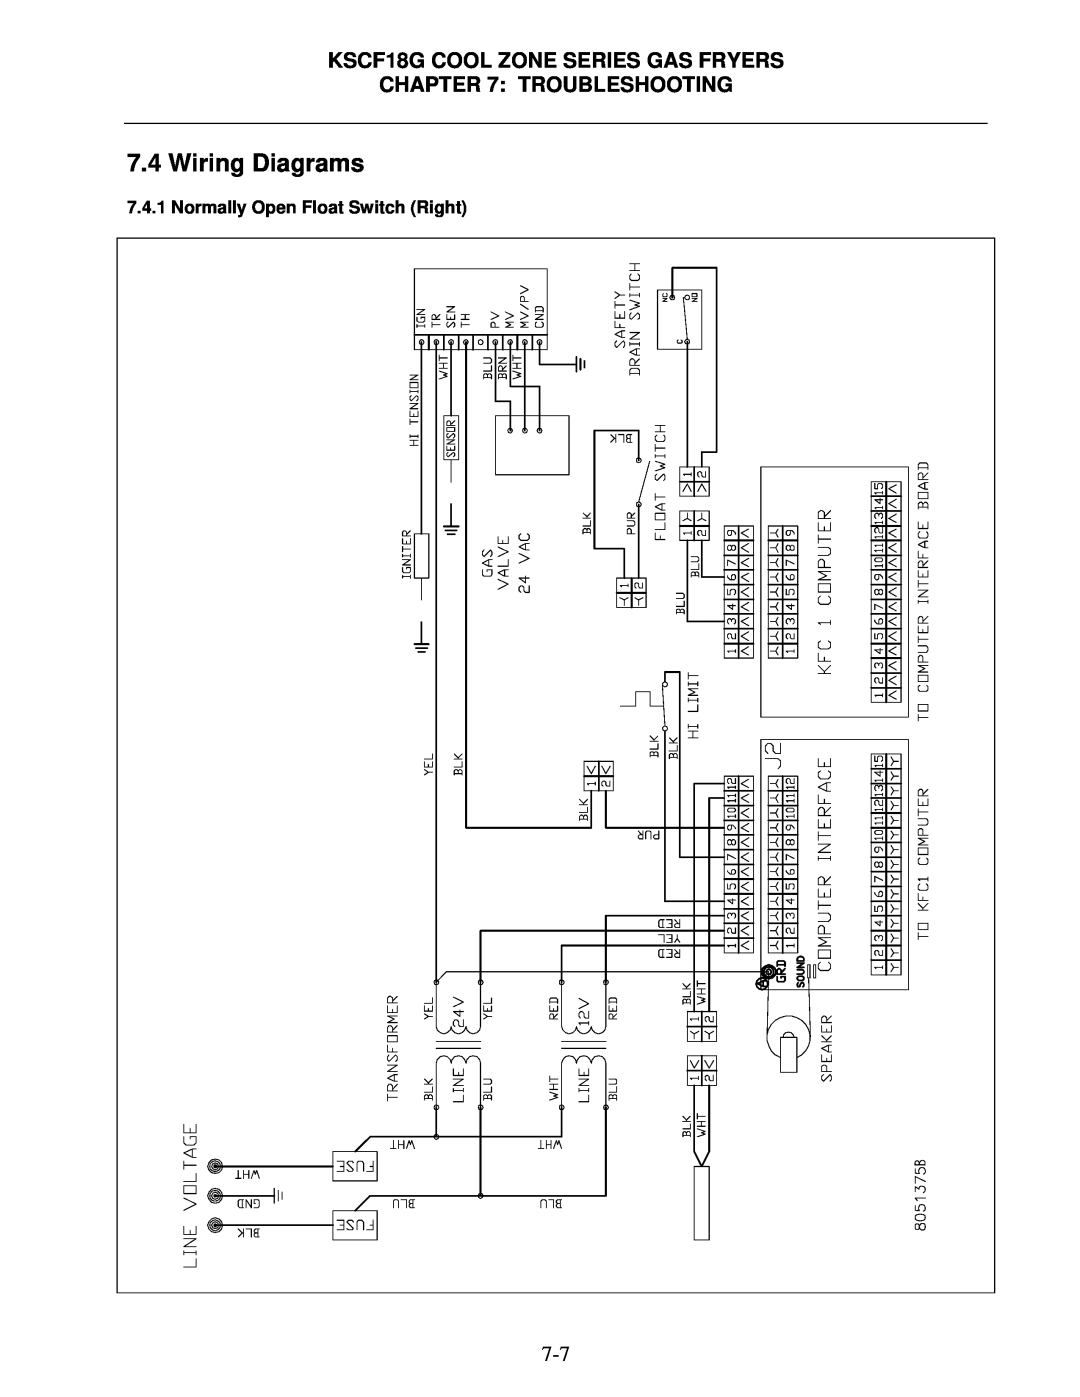 Frymaster manual Wiring Diagrams, KSCF18G COOL ZONE SERIES GAS FRYERS, Troubleshooting, Normally Open Float Switch Right 